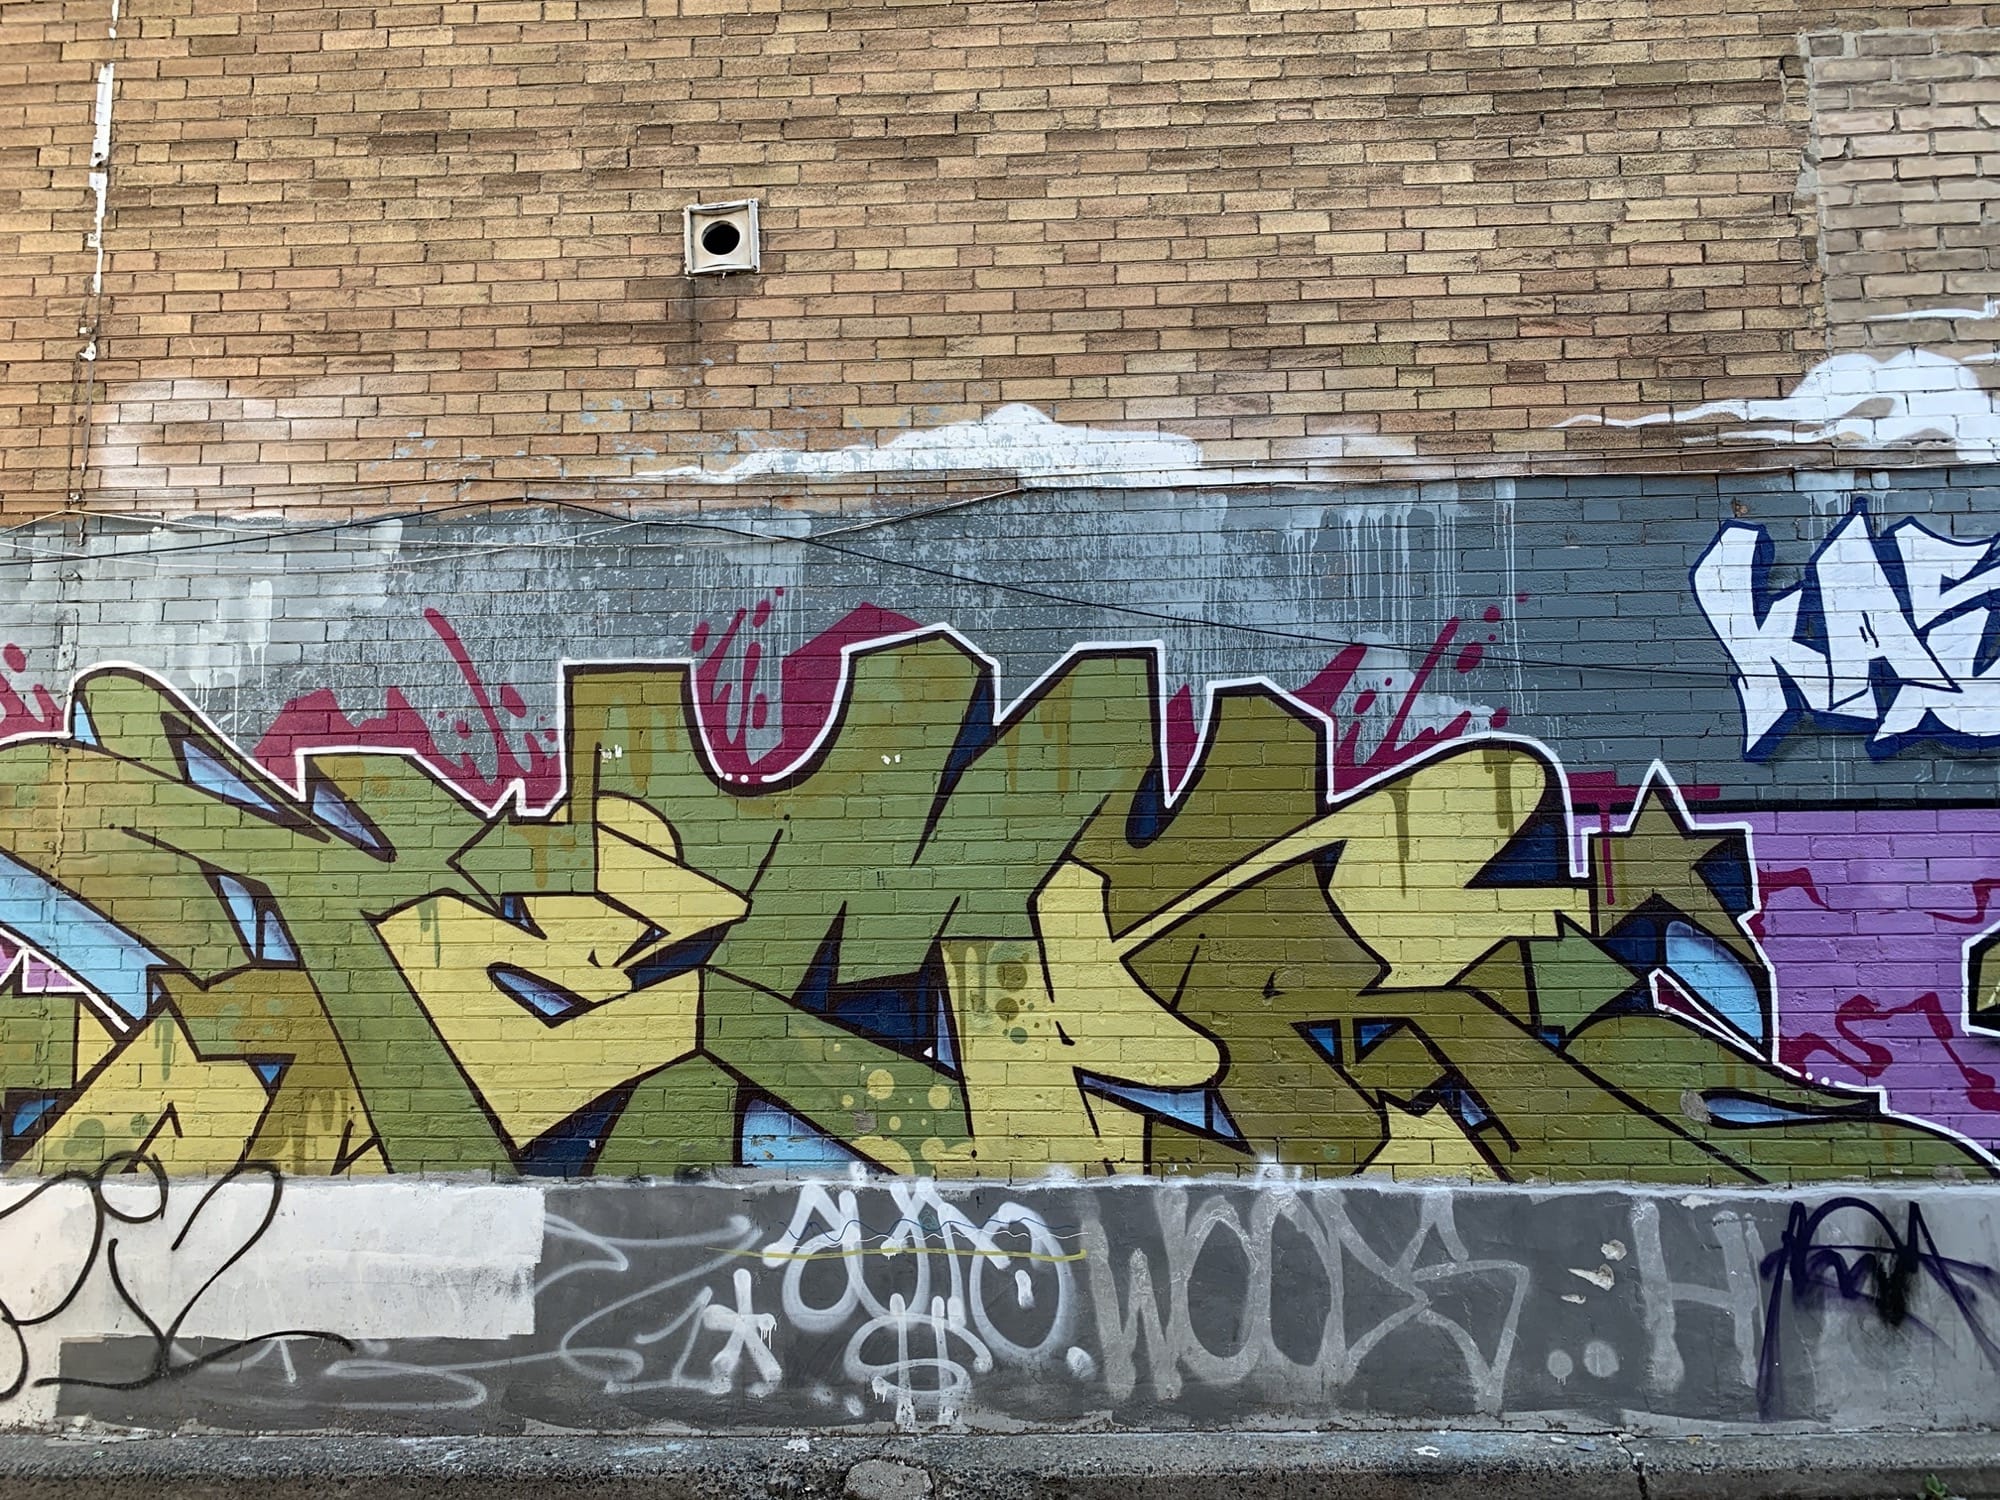 Graffiti 2378  captured by Rabot in Toronto Canada